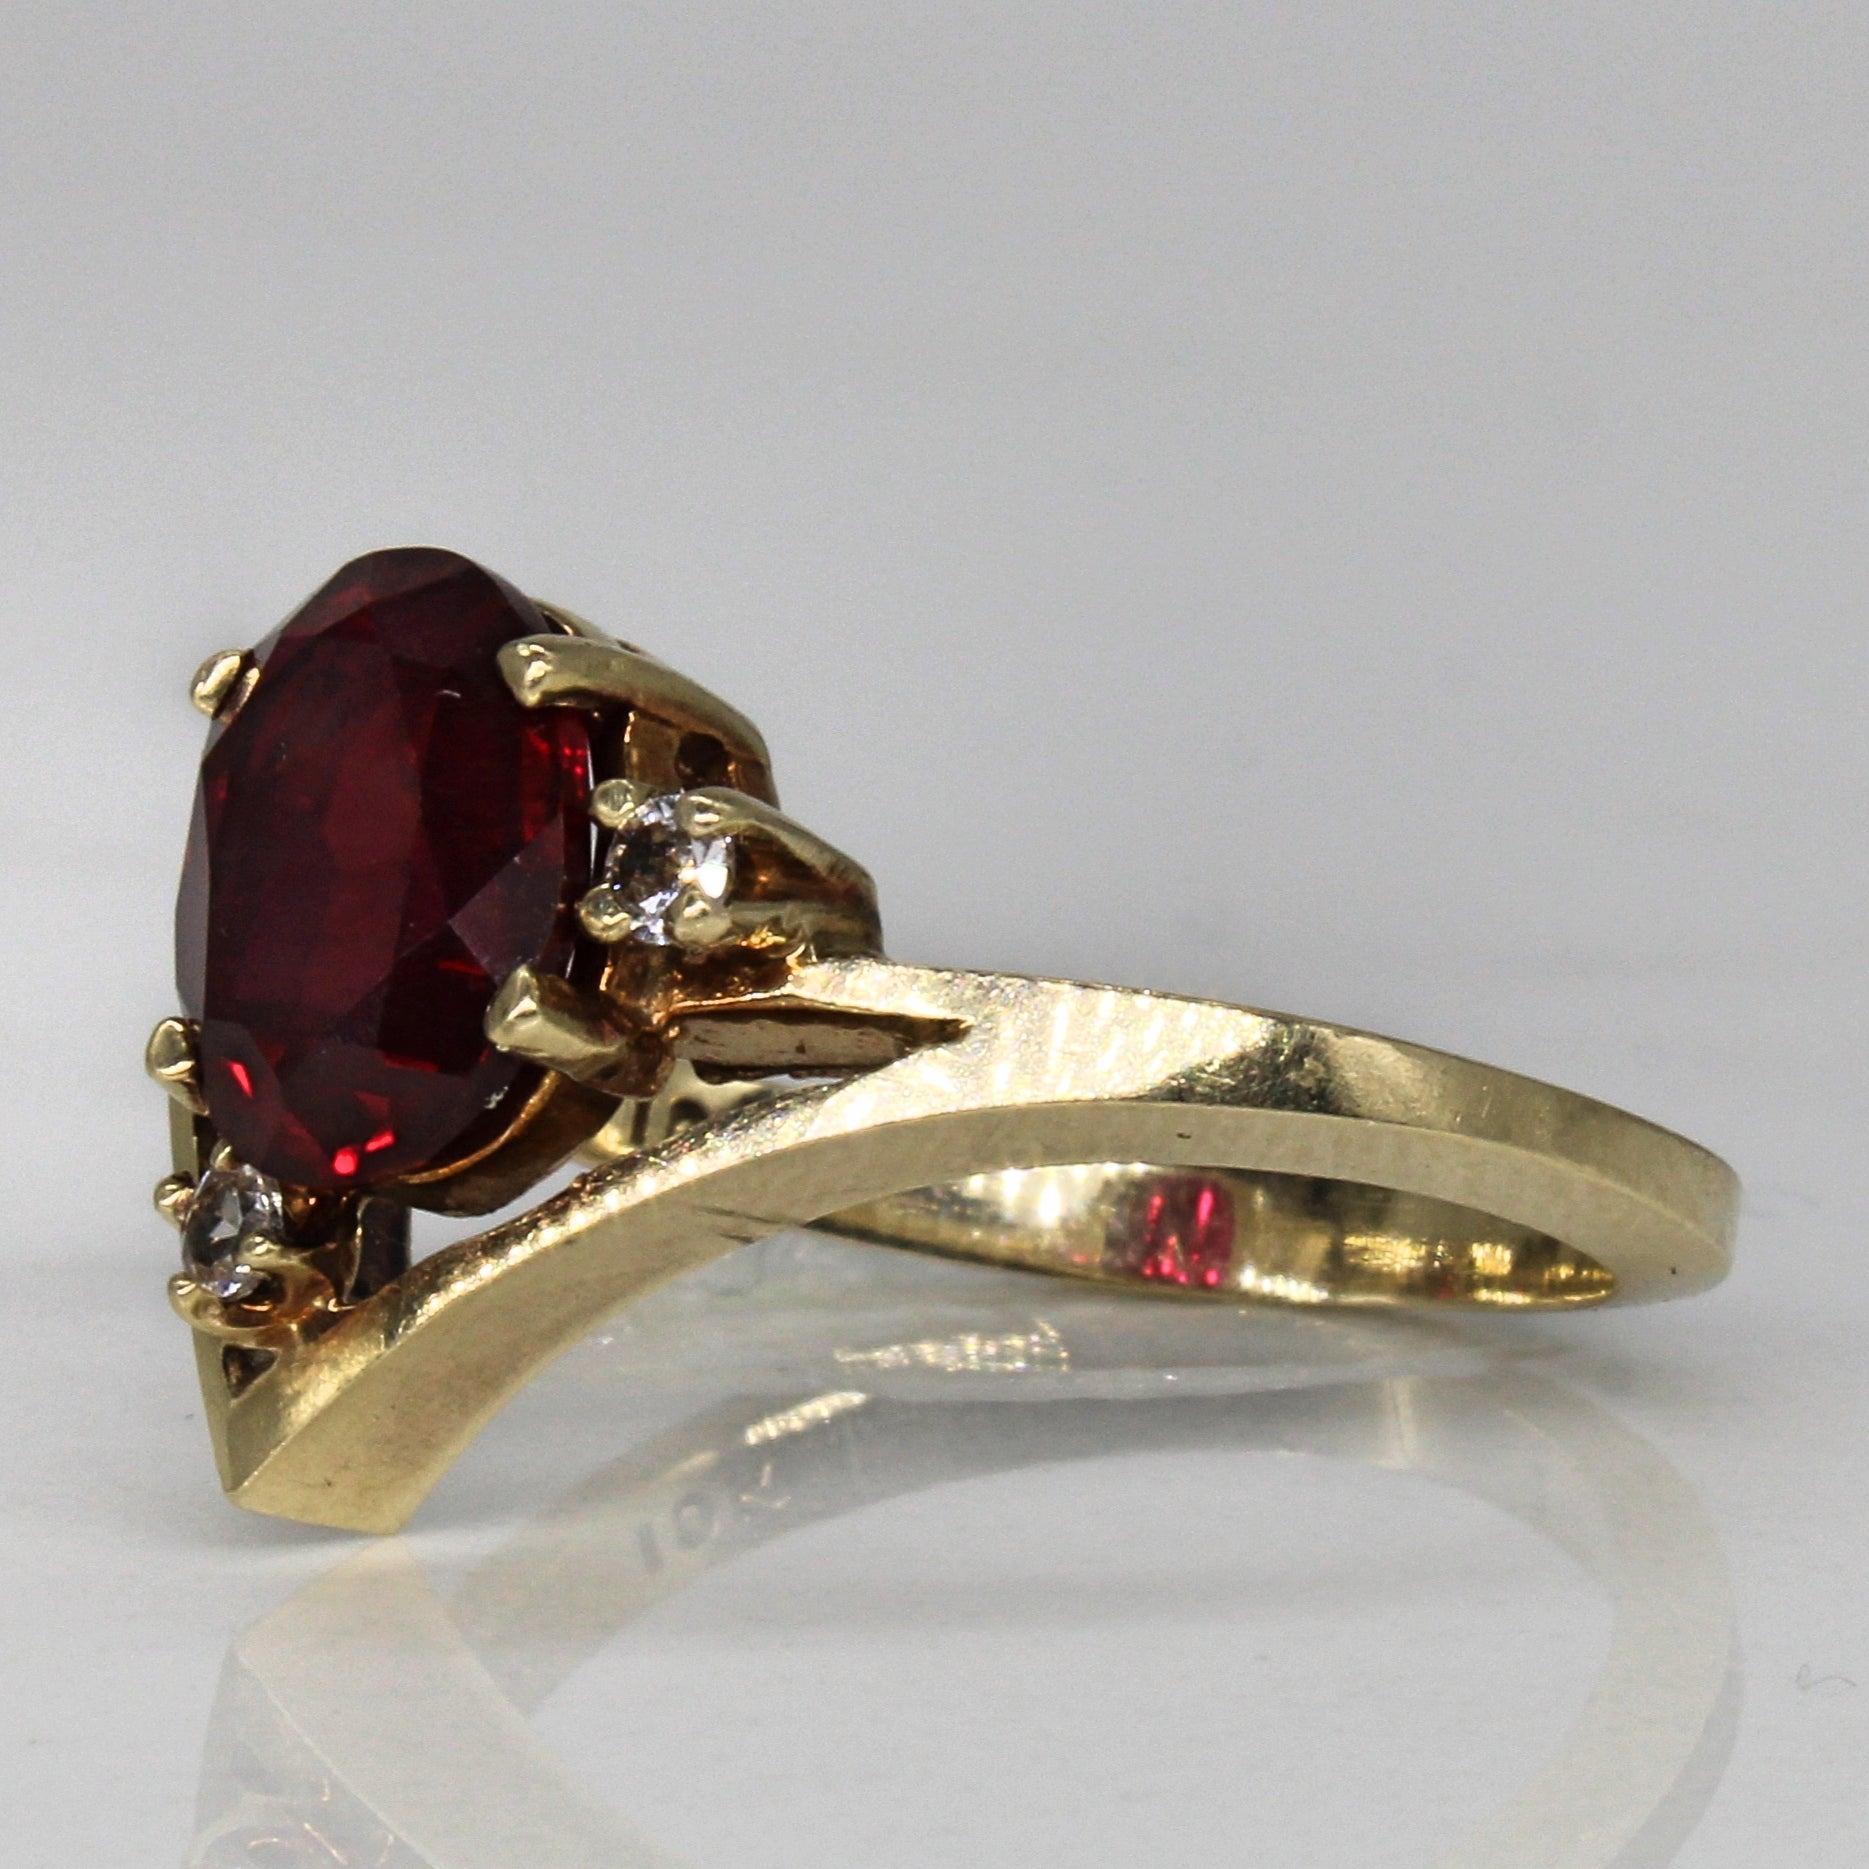 Synthetic Ruby & Sapphire Cocktail Ring | 2.15ct, 0.08ctw | SZ 6.75 |